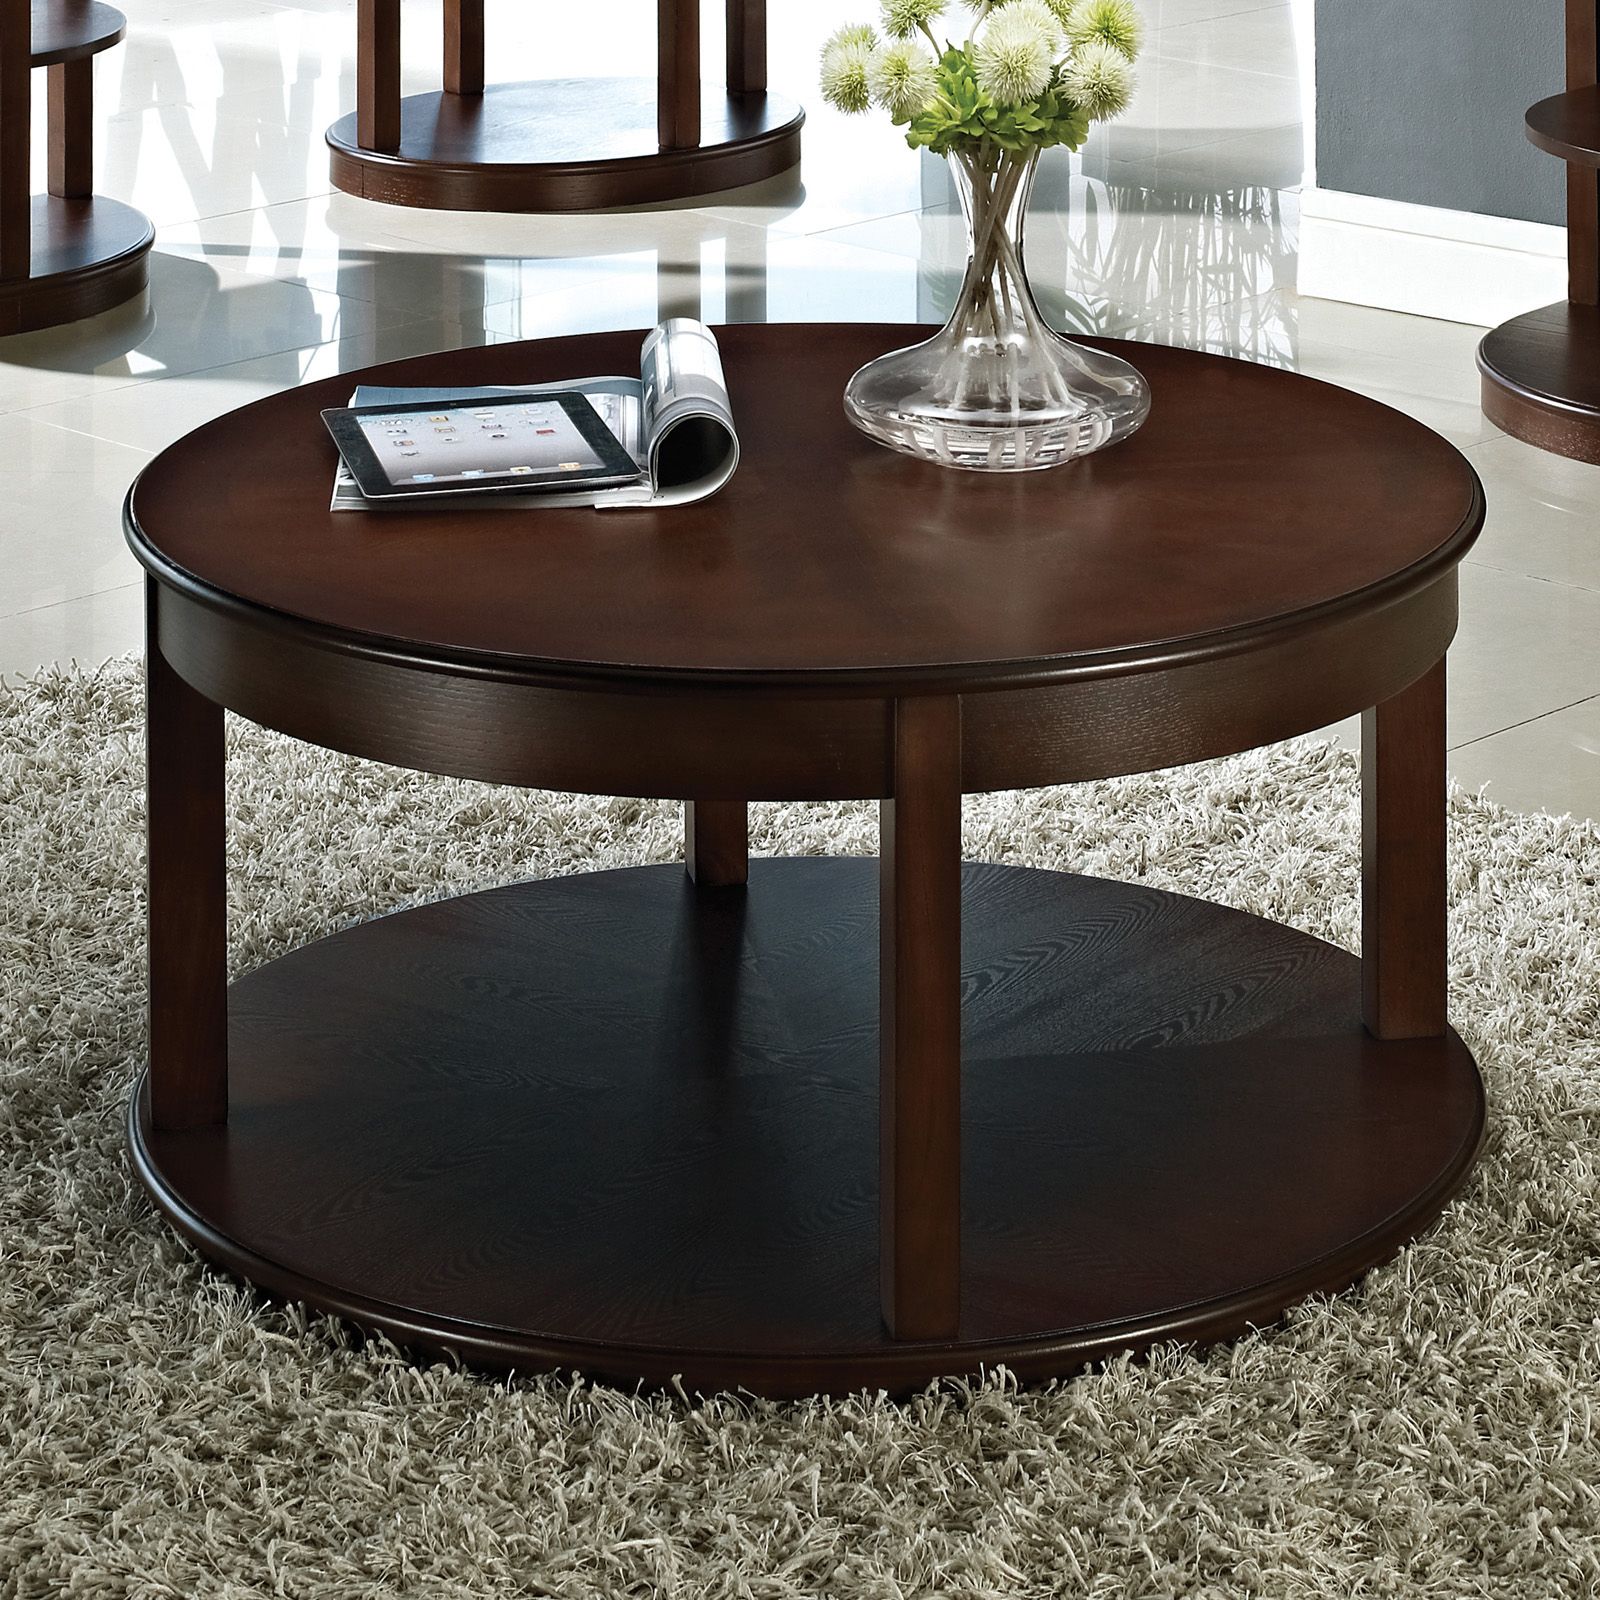 Steve Silver Crestview Round Espresso Wood Spinning Coffee Intended For Silver Coffee Tables (View 3 of 15)